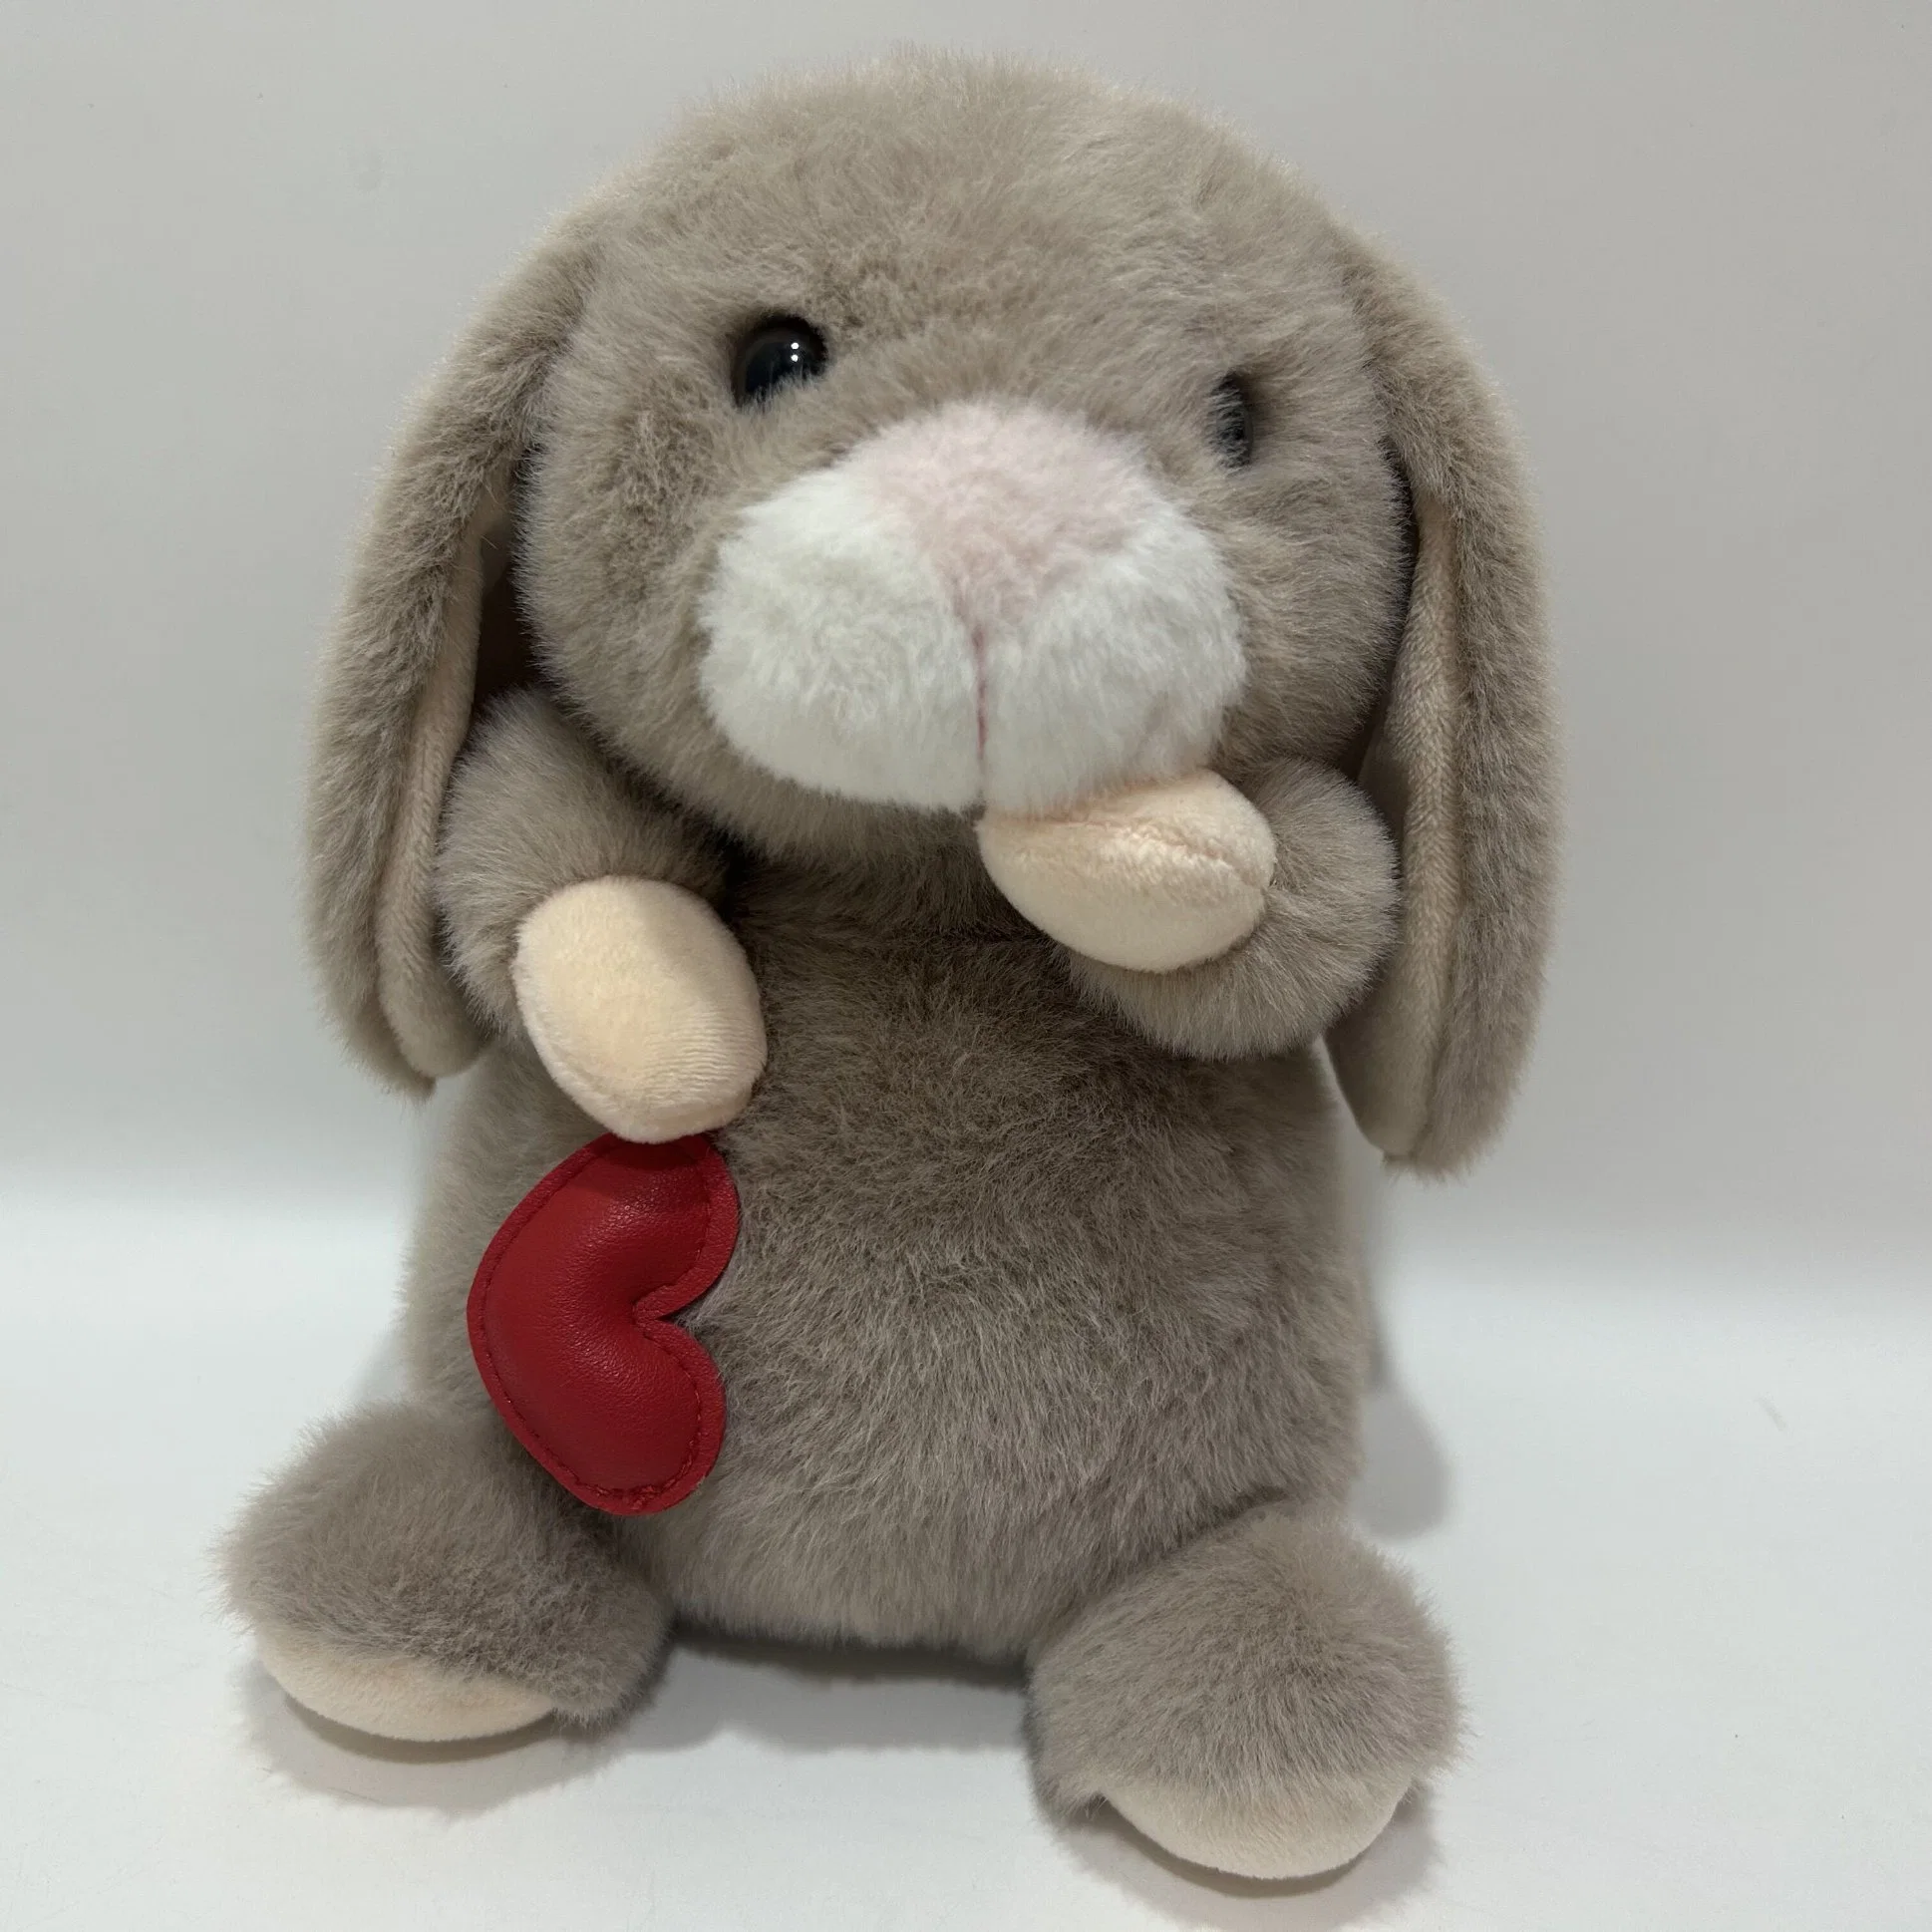 Hot Selling 2 Assorted Standing Plush Bunny Adorable Rabbit Children Gifts Stuffed Toys